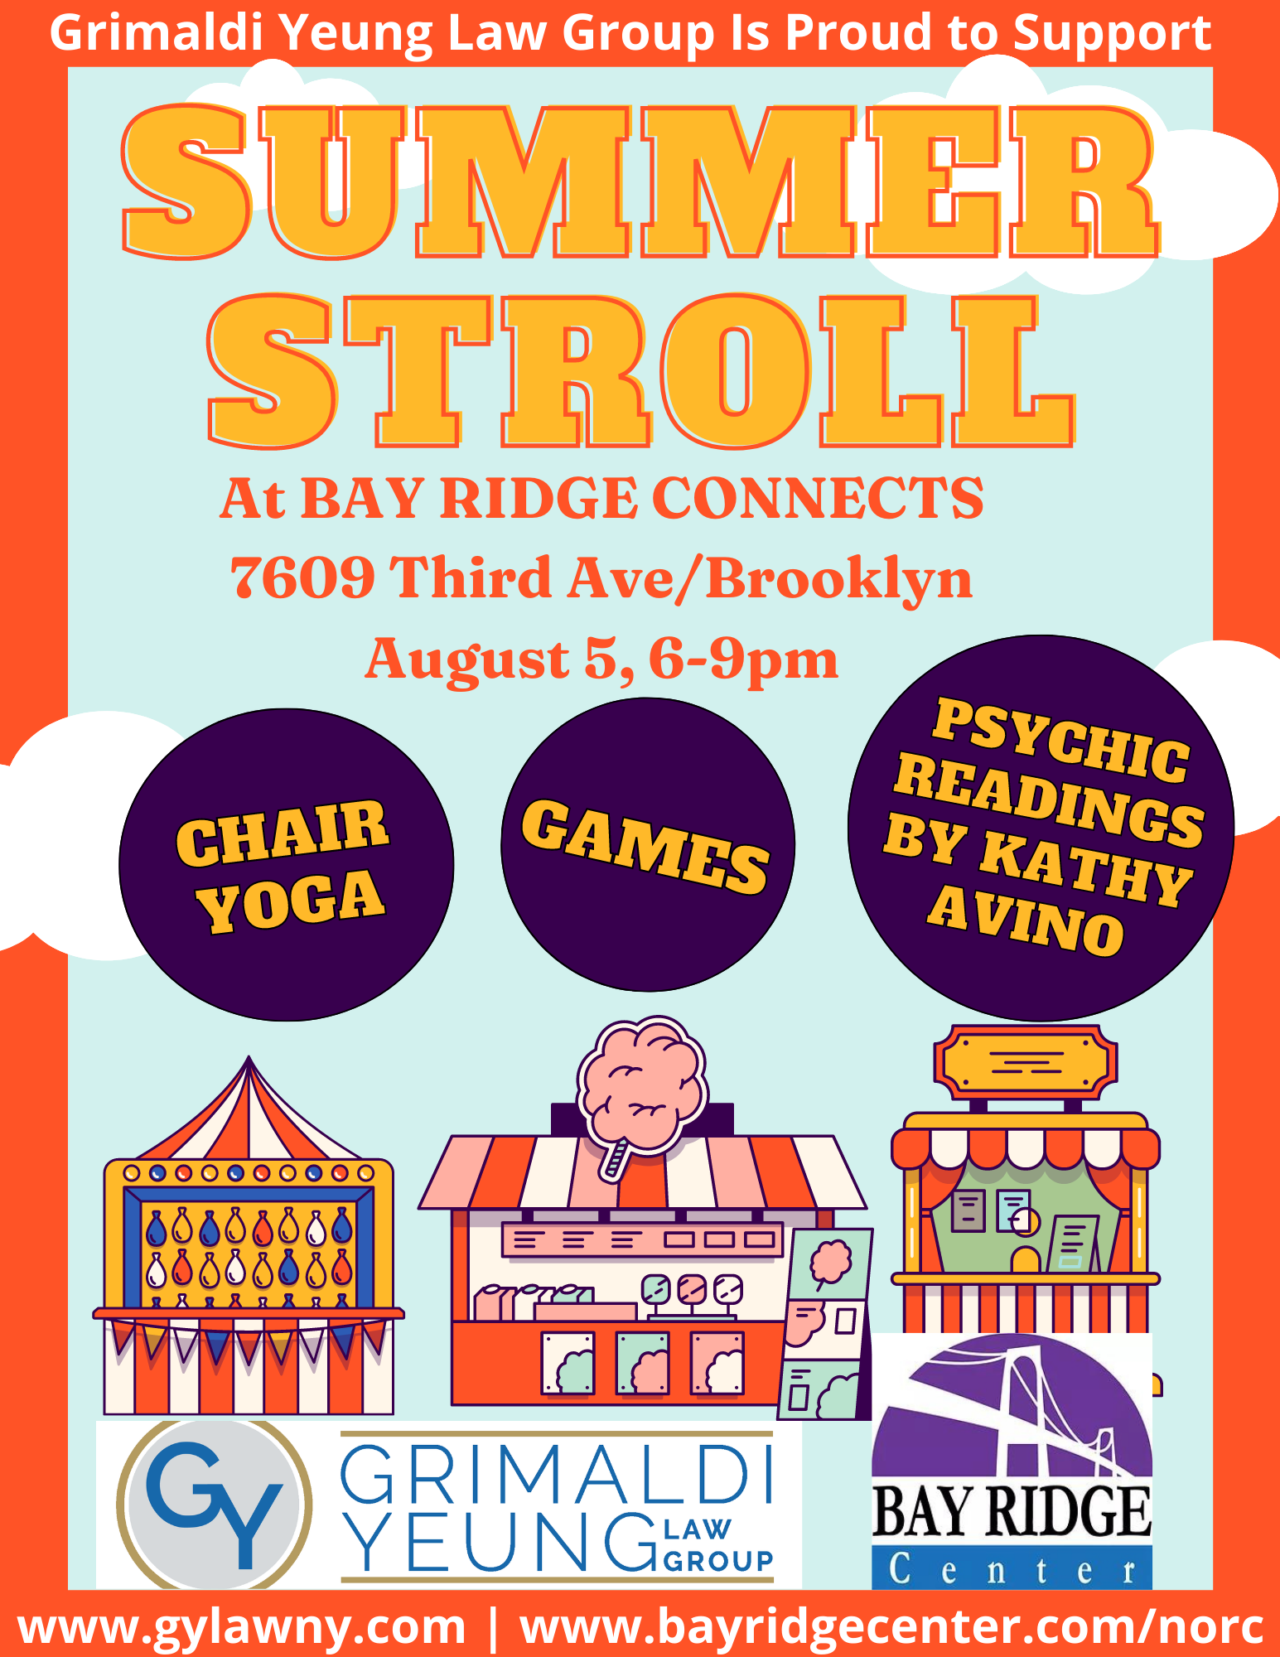 Summer Stroll at Bay Ridge Connects Grimaldi Yeung Law Group